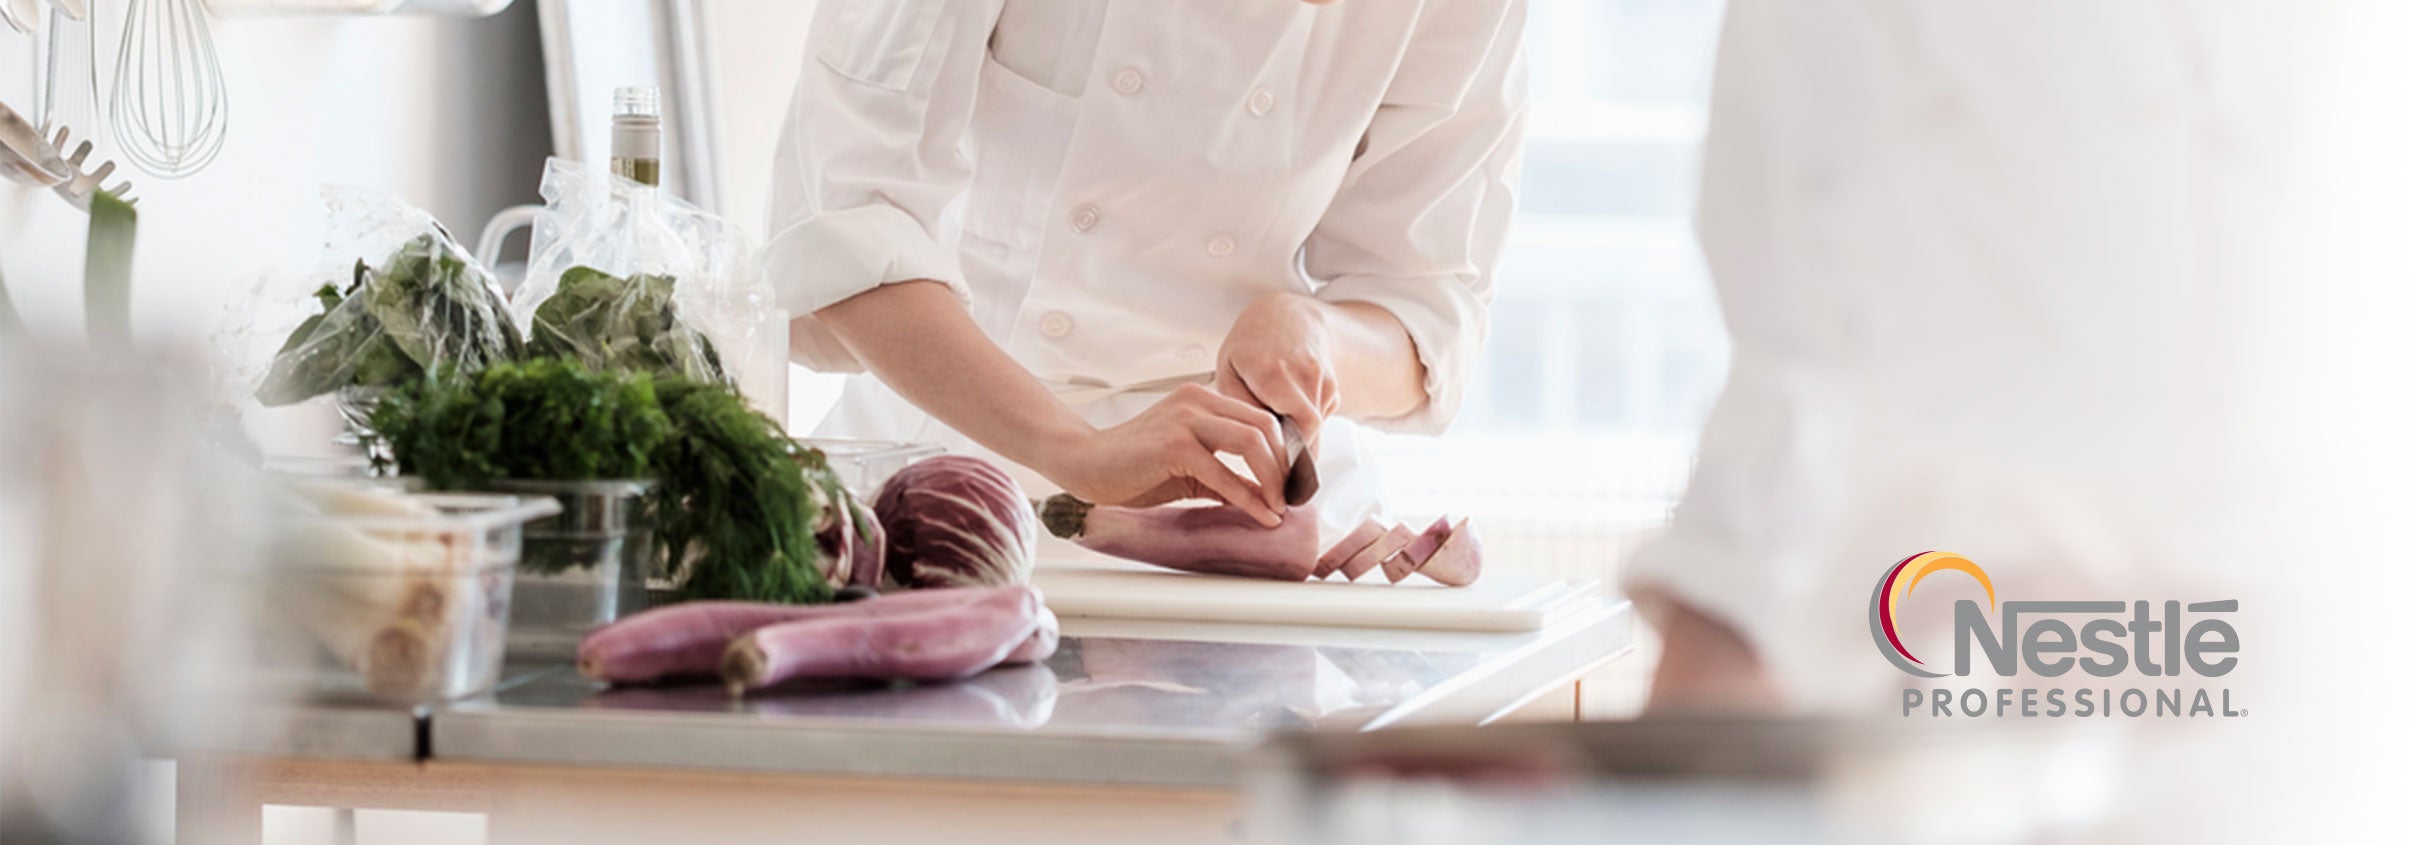 Close up of a chef slicing meat on a table